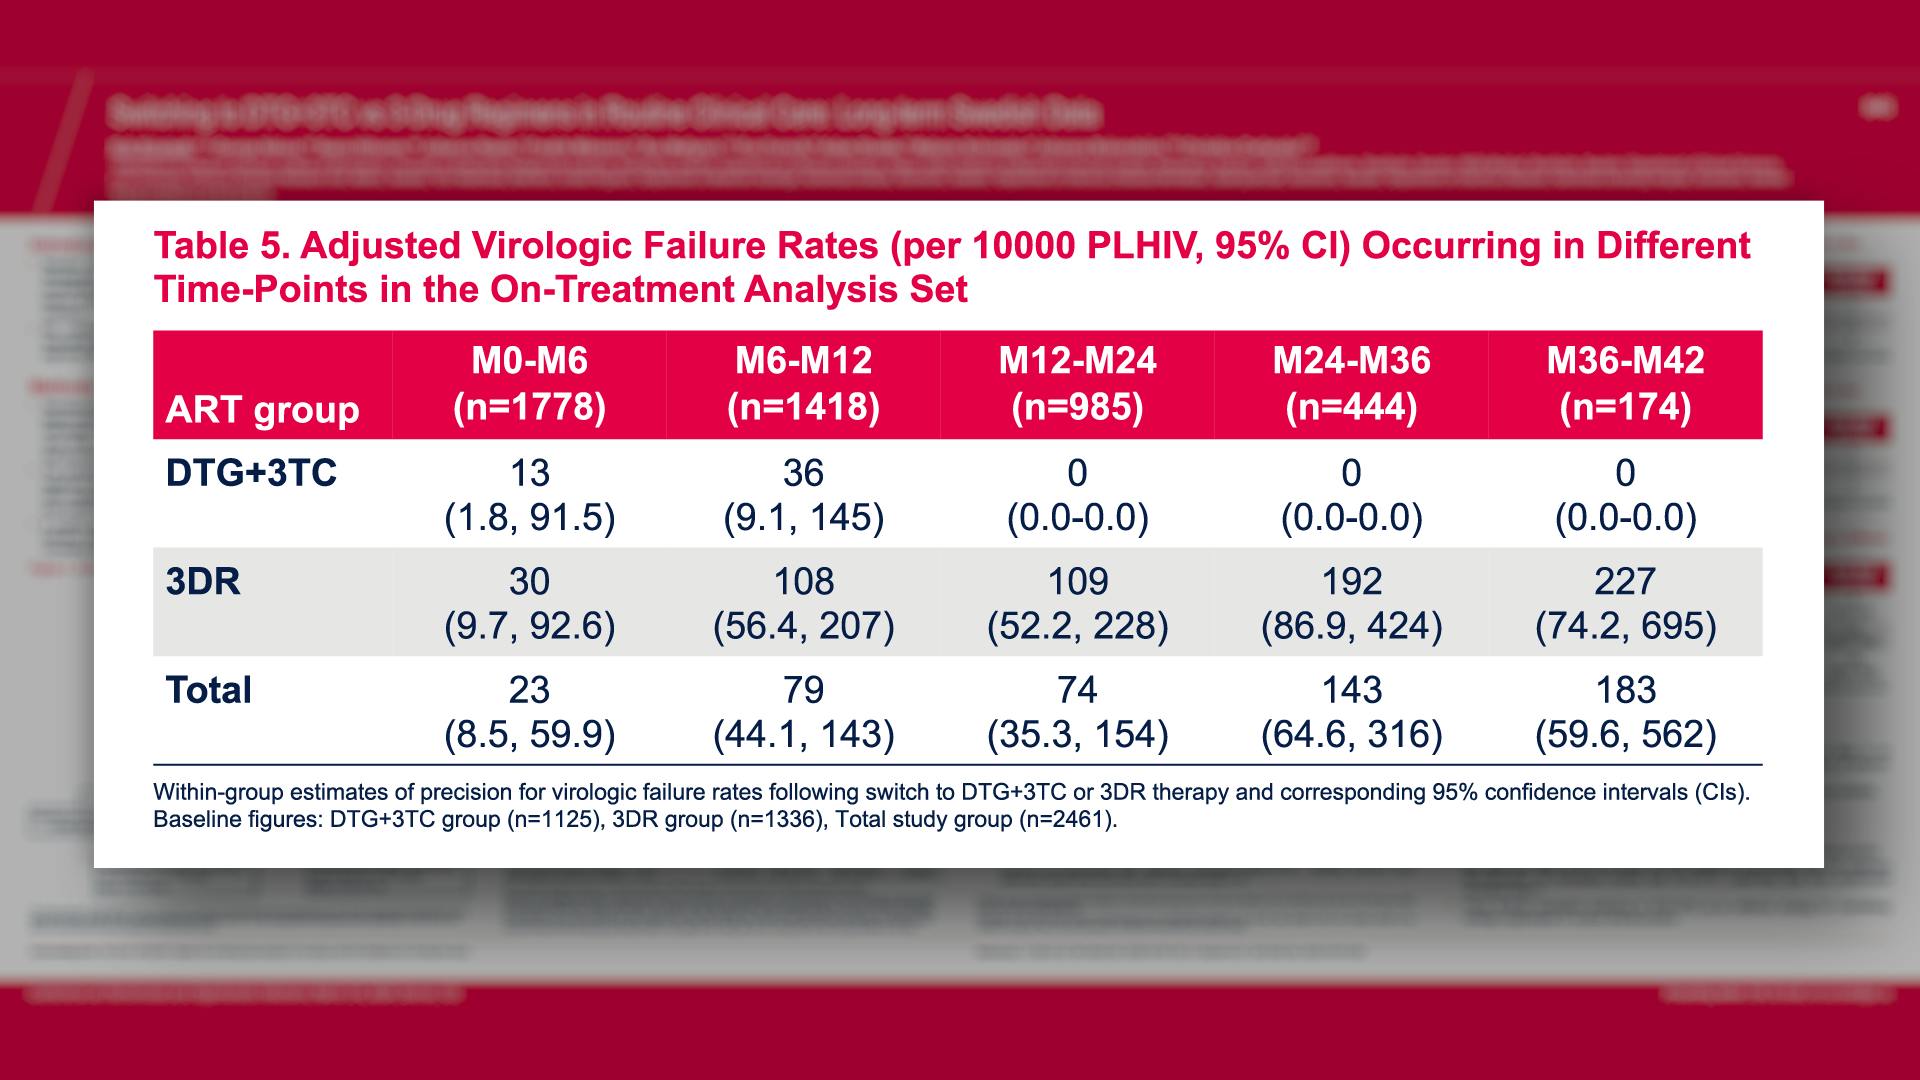 Adjusted Virologic Failure Rates (per 10000 PLHIV, 95% CI) Occurring in Different Time-Points in the On-Treatment Analysis Set